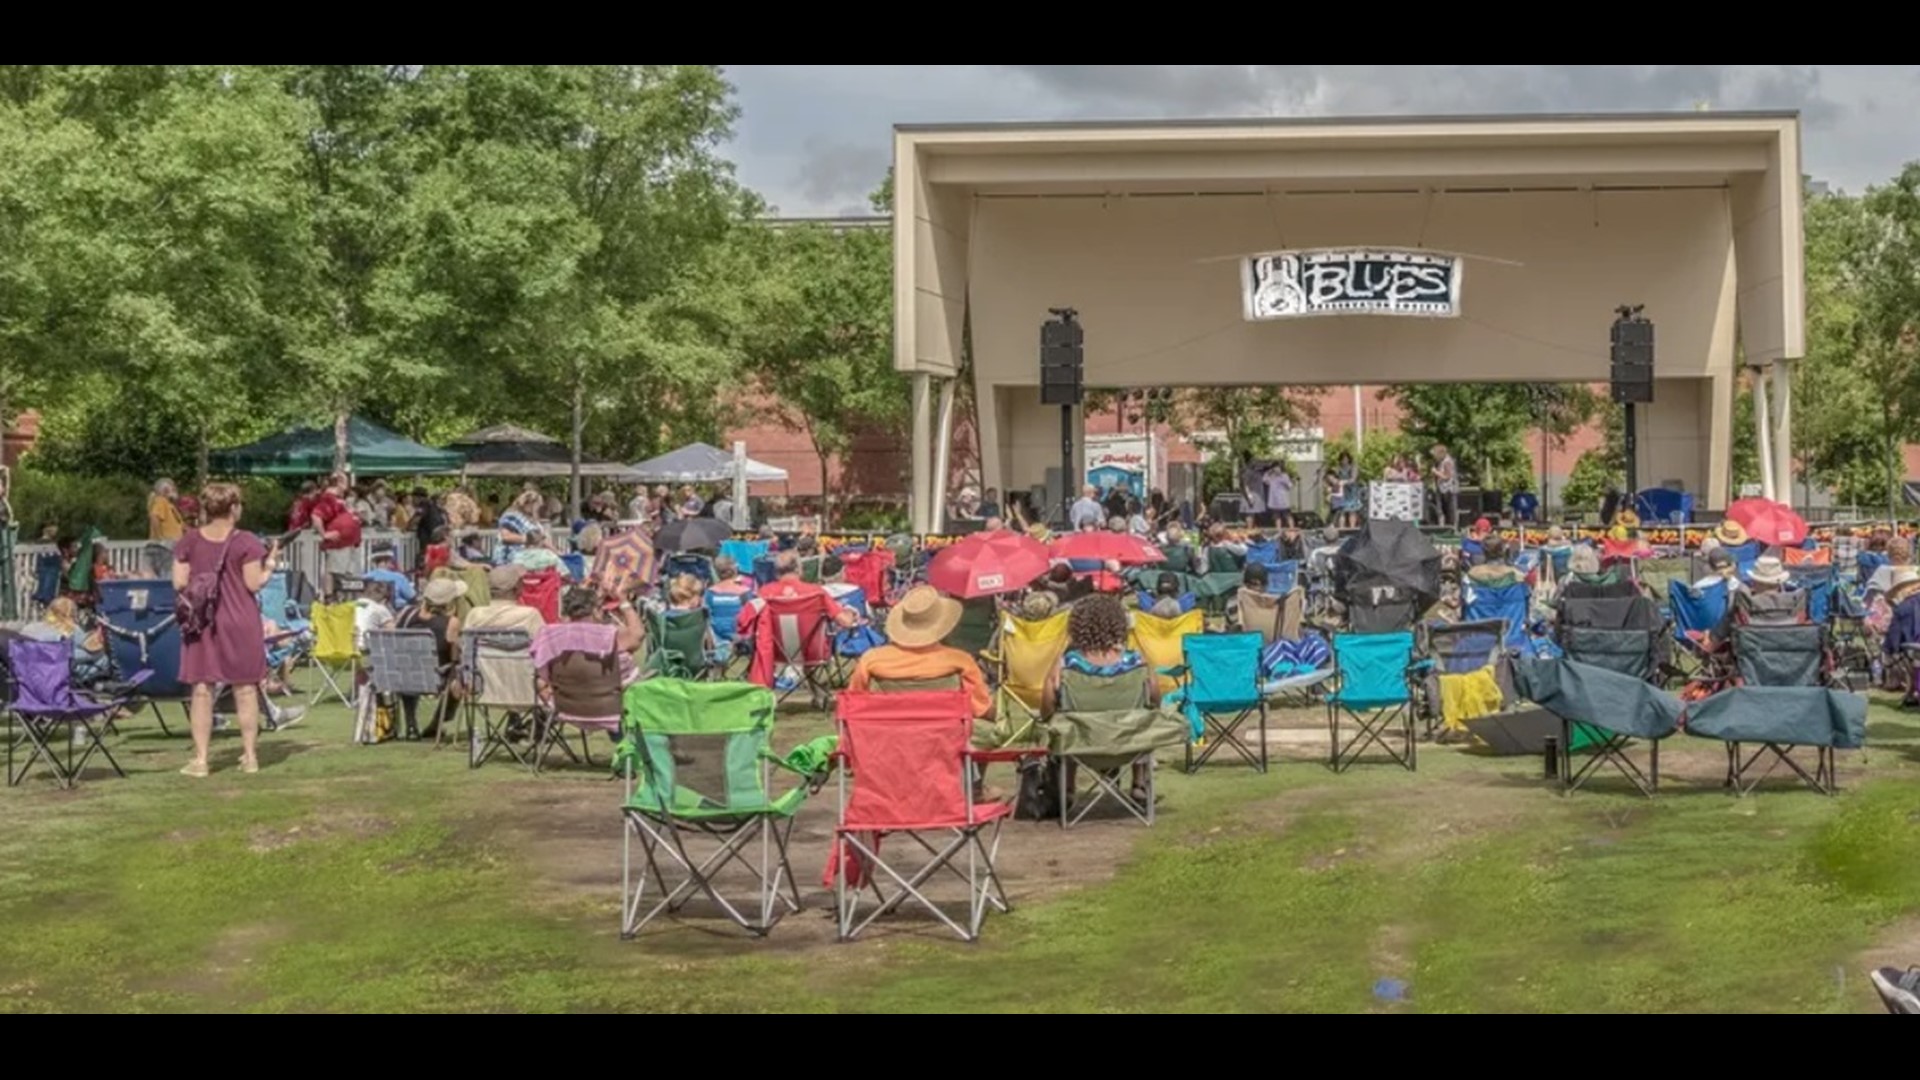 Blues Festival Takes Over Greensboro This Weekend